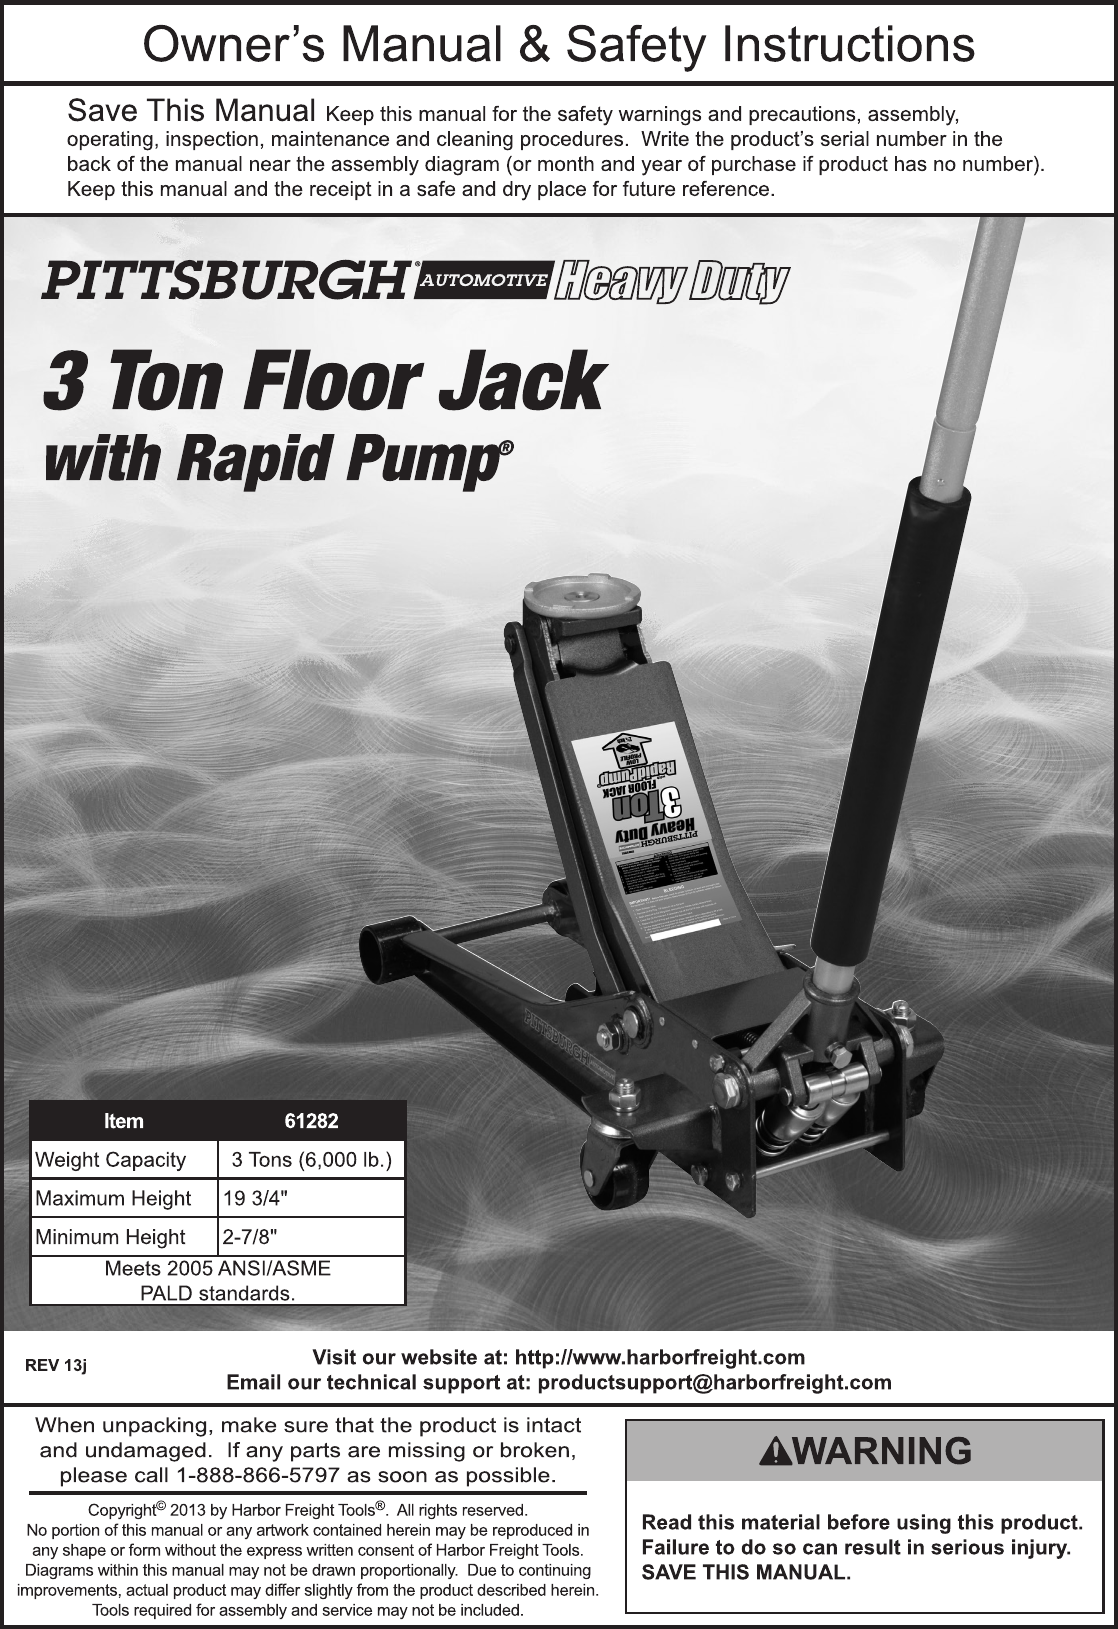 Page 1 of 8 - Harbor-Freight Harbor-Freight-3-Ton-Low-Profile-Steel-Heavy-Duty-Floor-Jack-With-Rapid-Pump-Product-Manual-  Harbor-freight-3-ton-low-profile-steel-heavy-duty-floor-jack-with-rapid-pump-product-manual